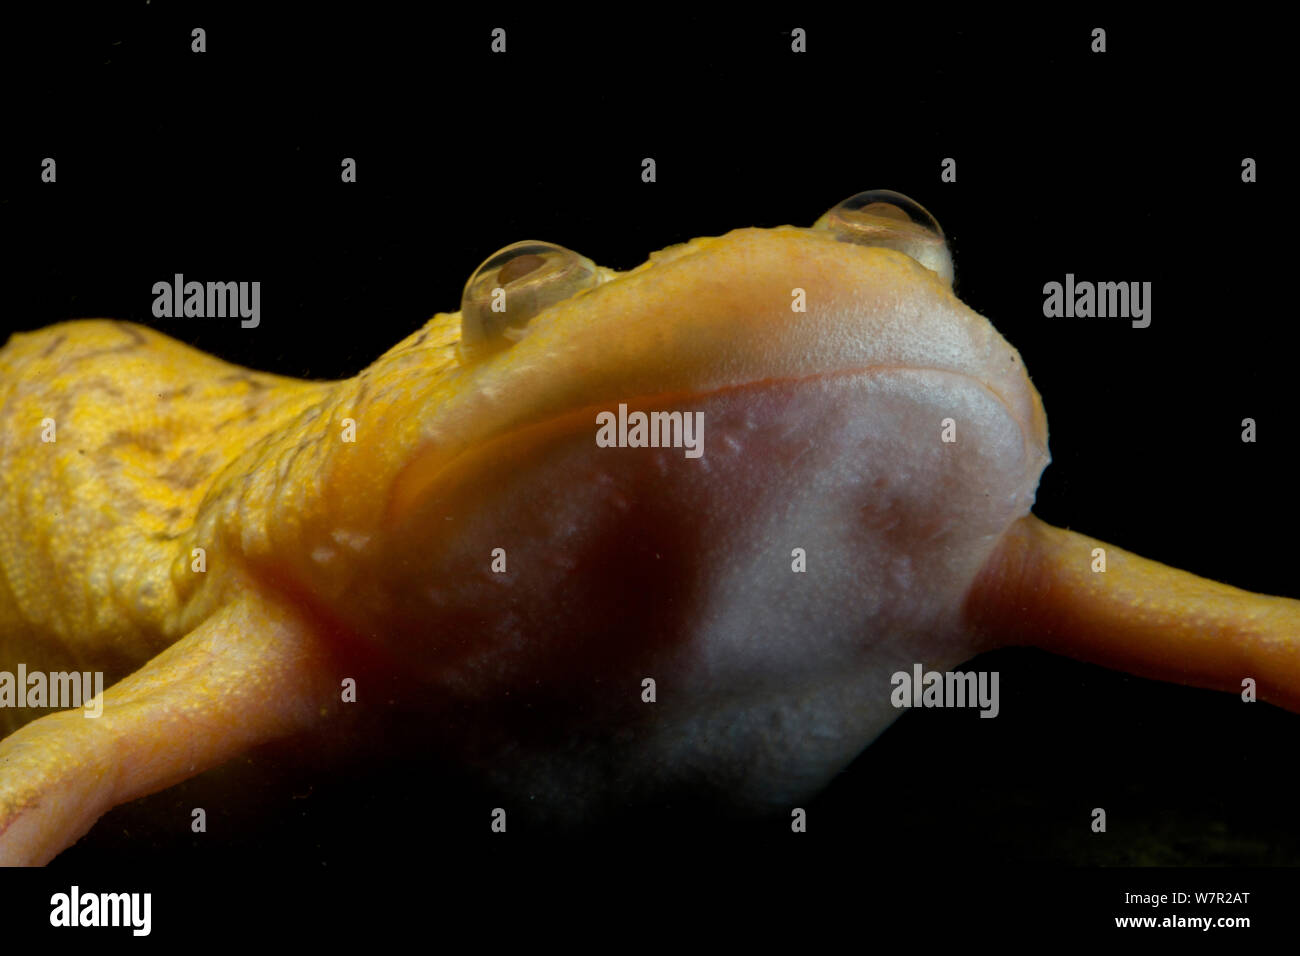 African Clawed Frog (Xenopus laevis), captive. Native to Southern Africa, Xenopus is now a scientific model organism, used extensively in research. Stock Photo